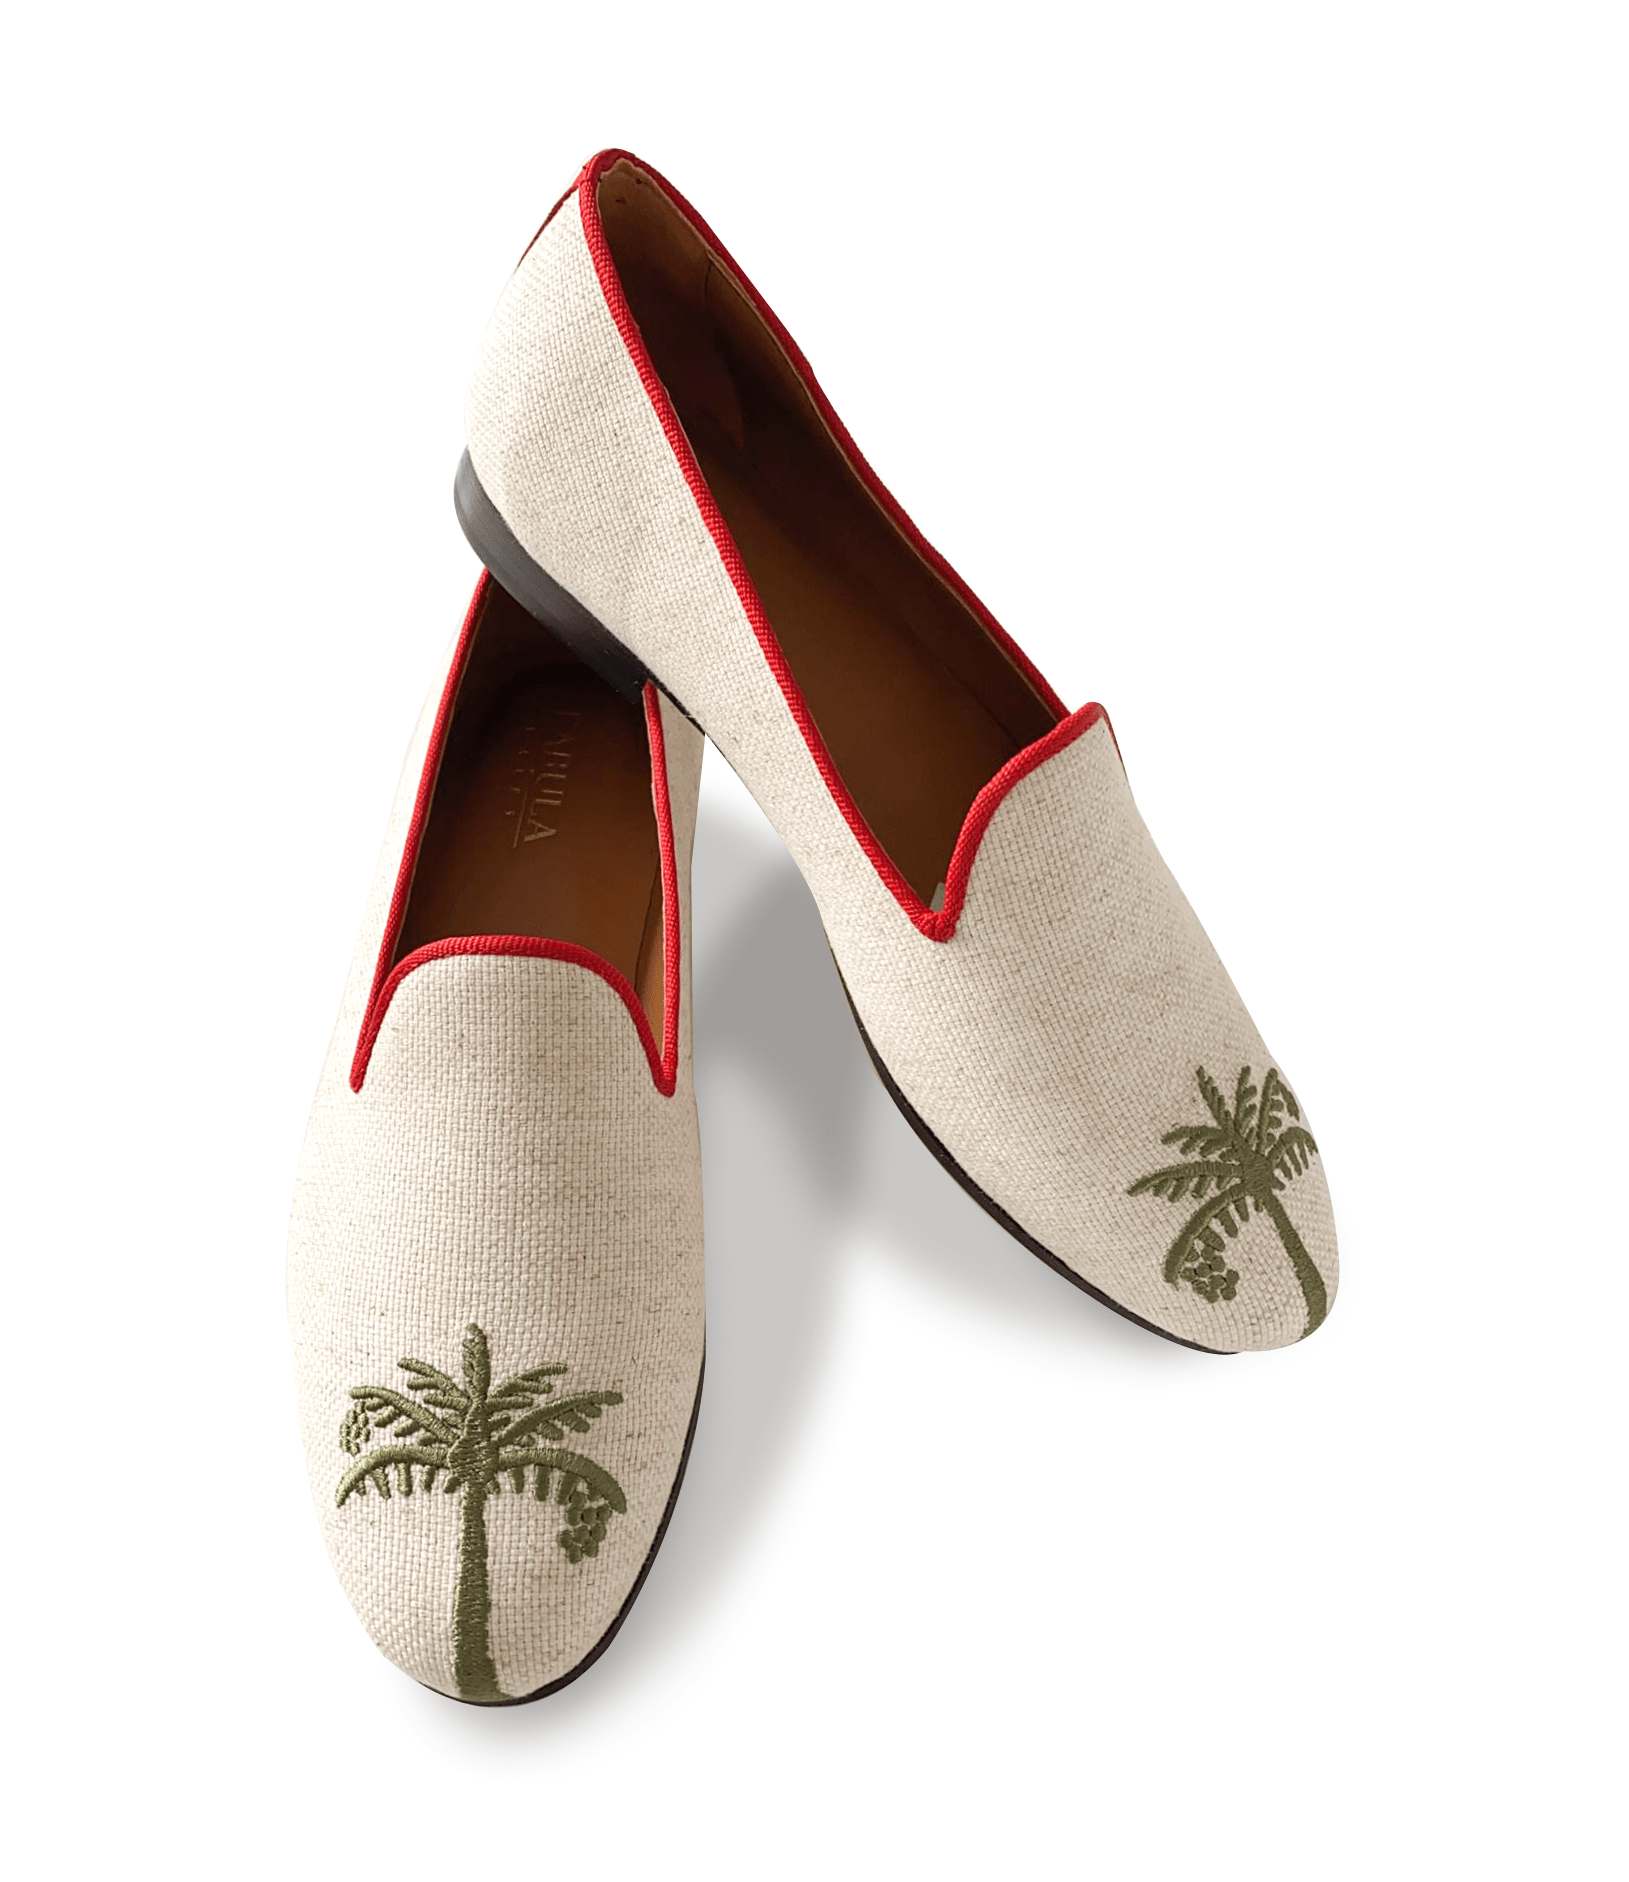 Beige linen slippers with red grosgrain trimming and palm tree embroidery. Bespoke handmade slippers